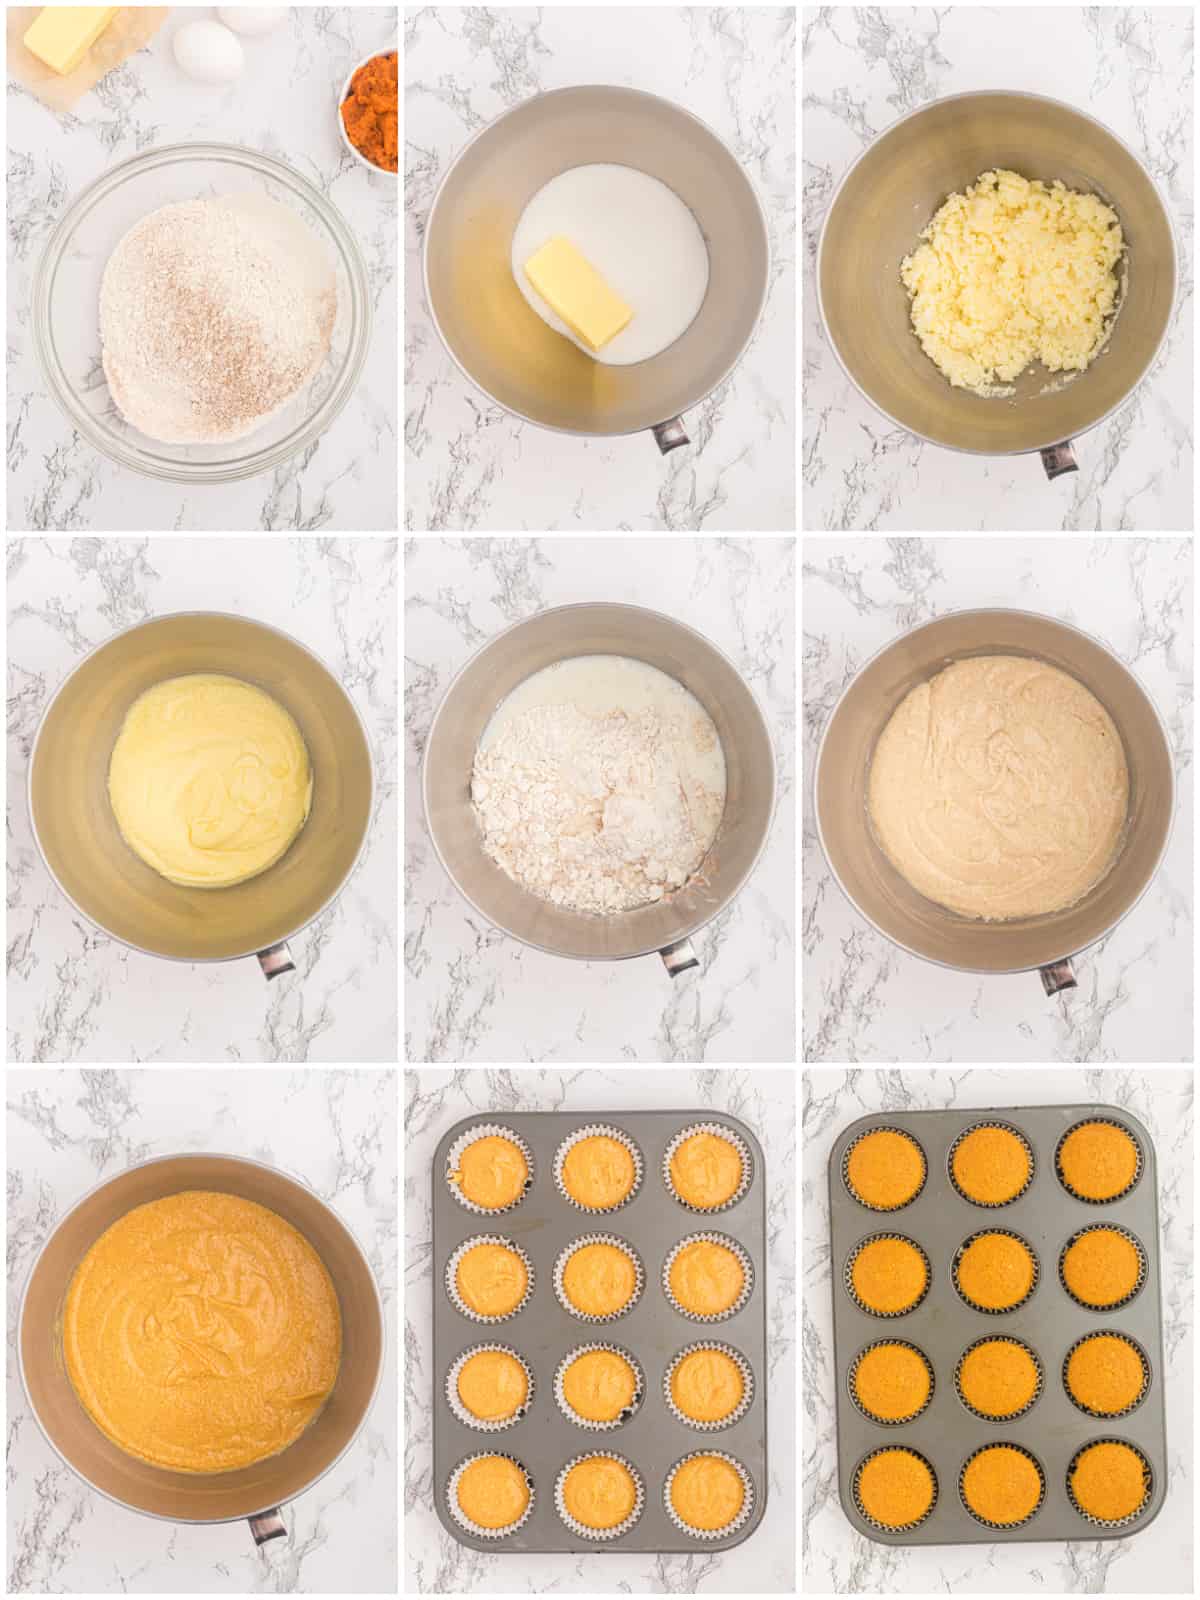 Step by step photos on how to make Pumpkin Cupcakes.